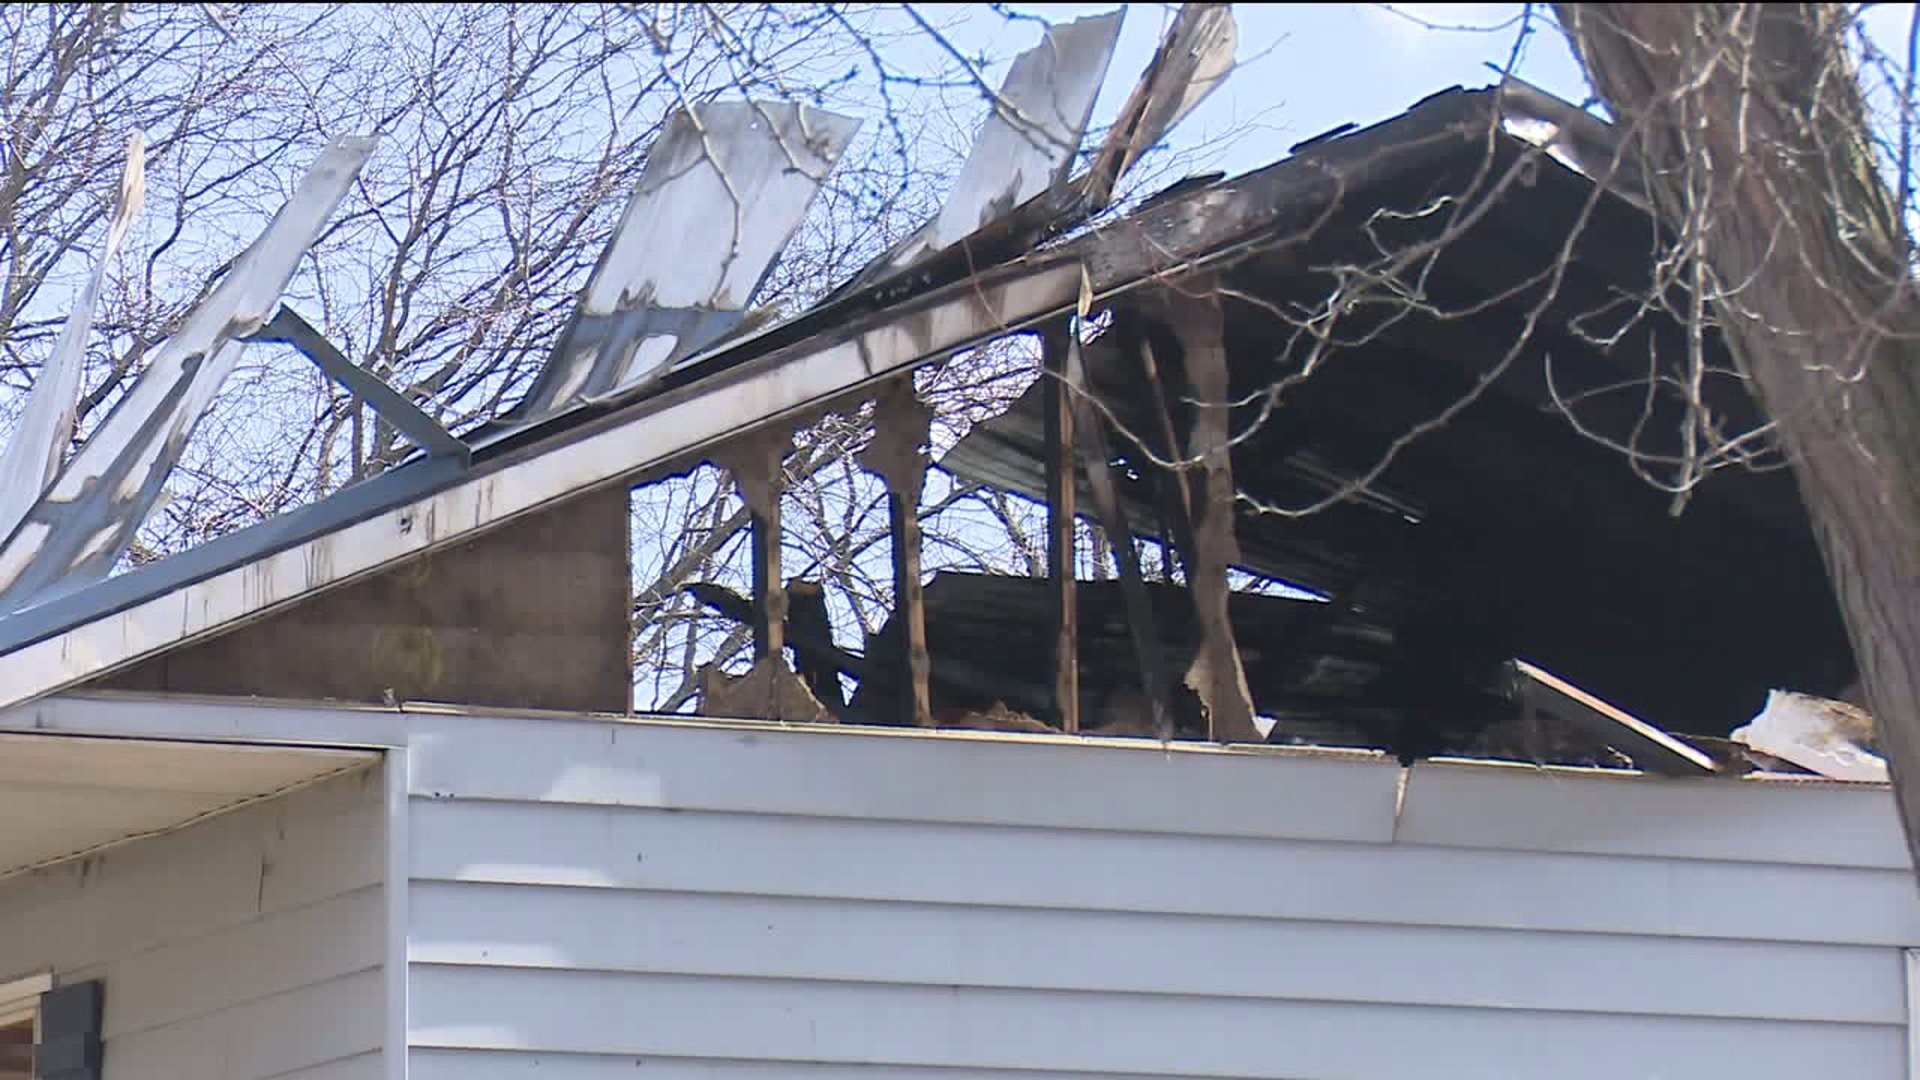 After Recovering from Two Floods, Woman's Home Gutted by Fire